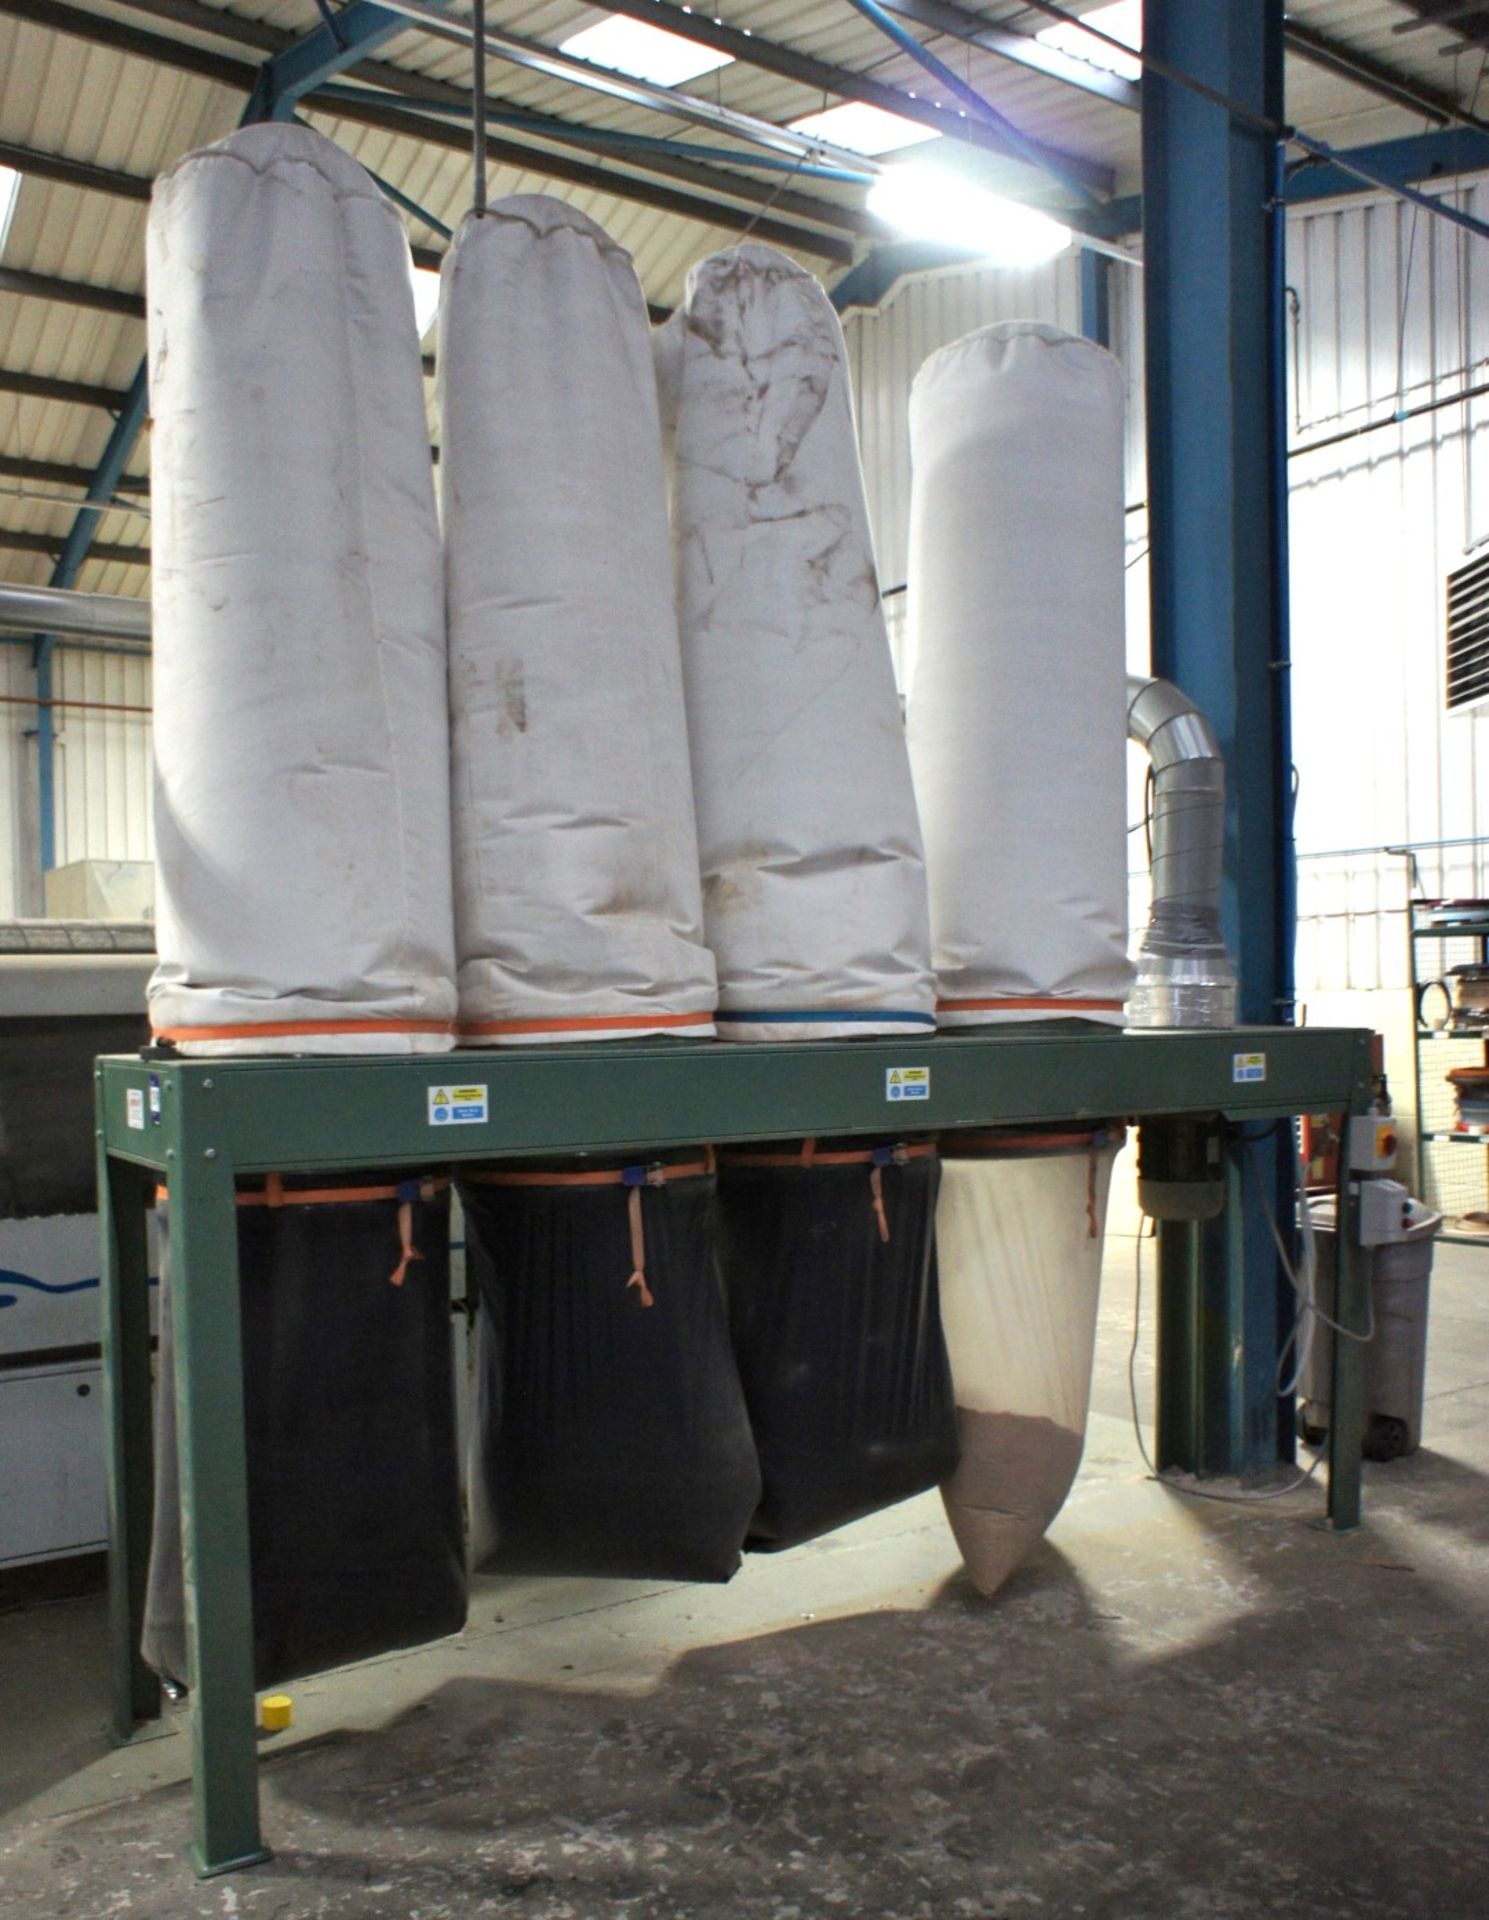 * Inventar Ltd Mk4 Four bag dust extractor. 3phase. Located at site 3 - Image 4 of 4